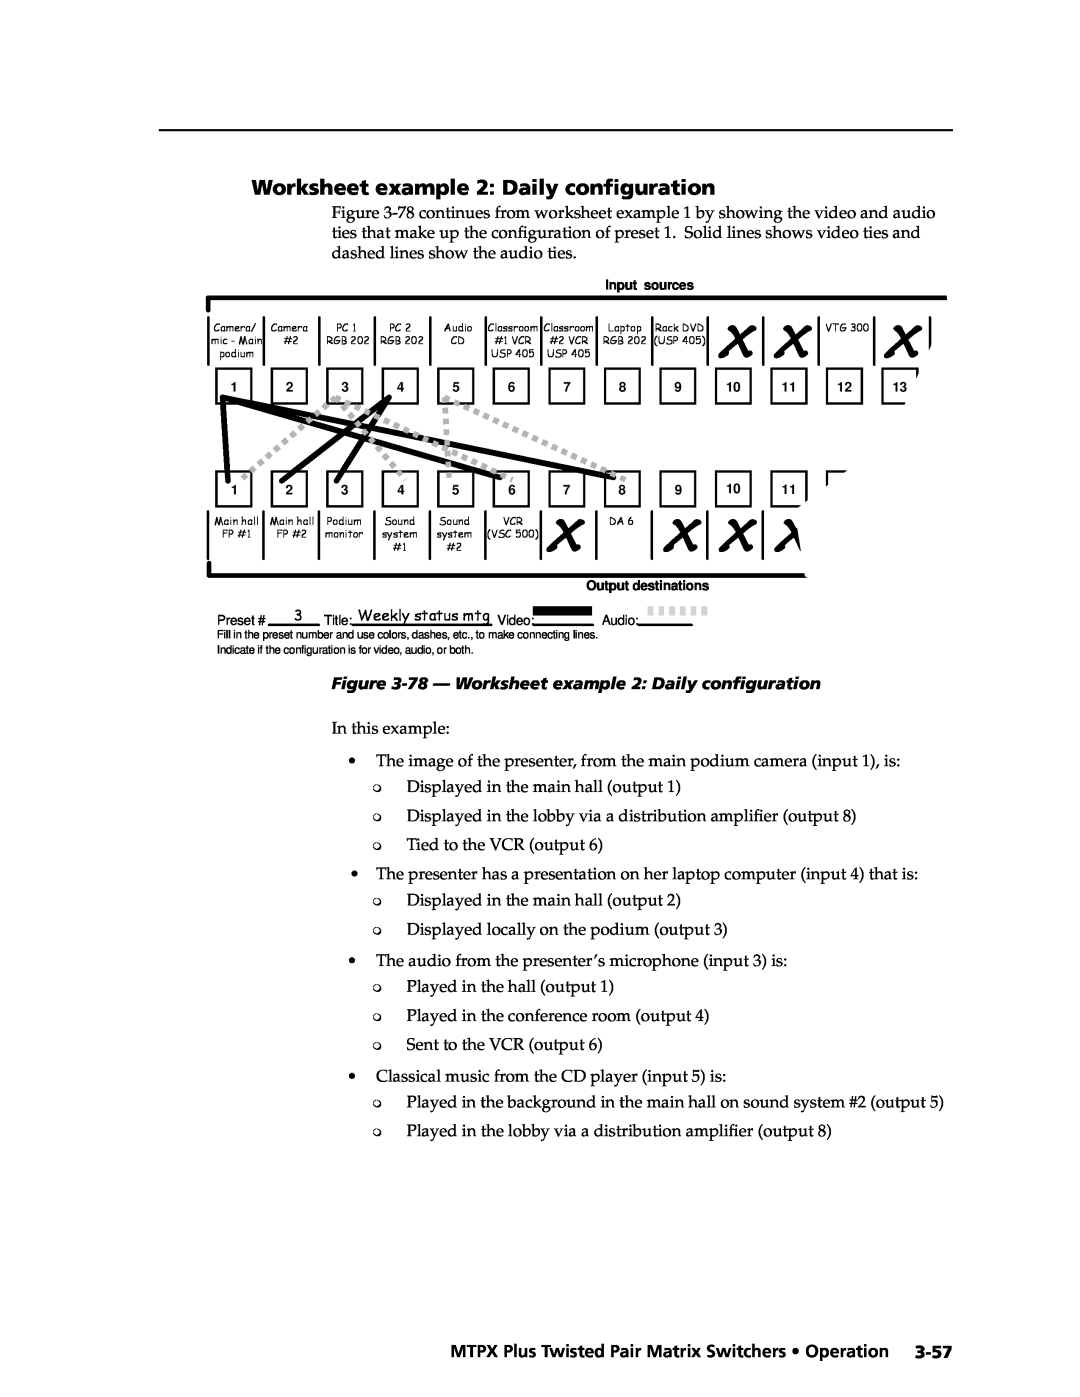 Extron electronic MTPX Plus Series manual 78 - Worksheet example 2 Daily configuration 